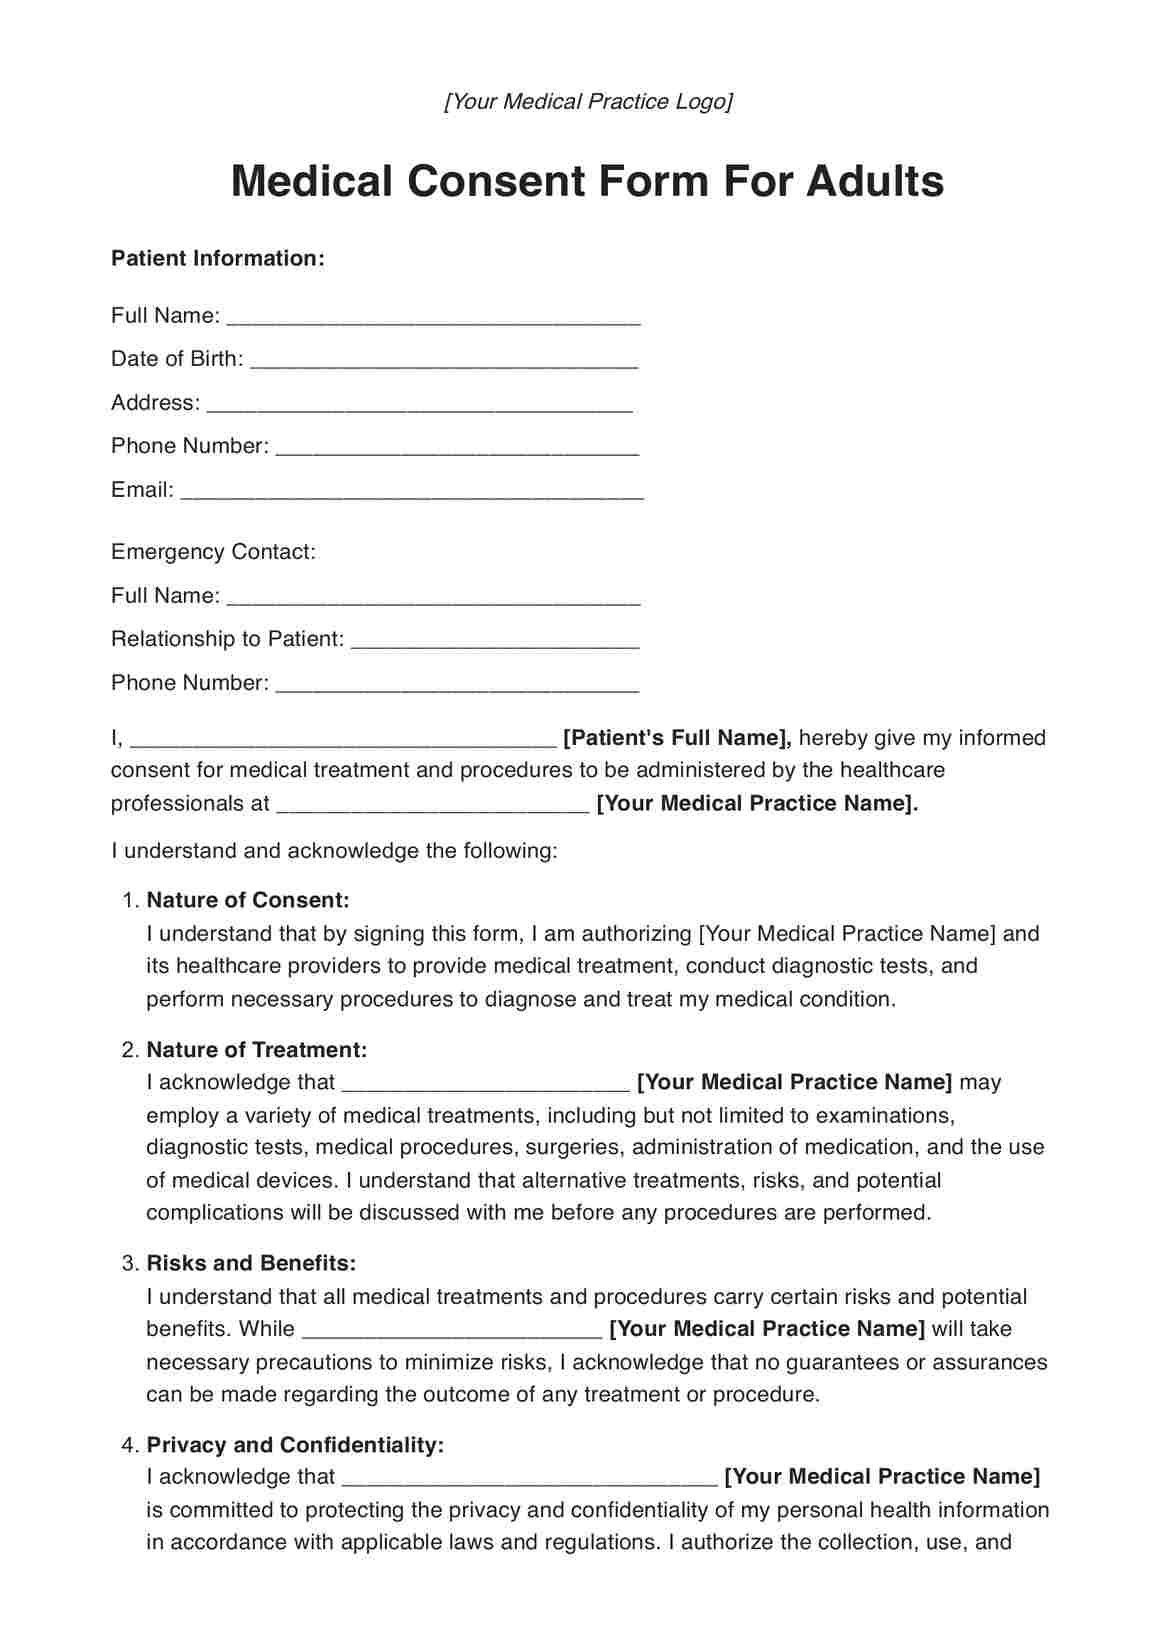 Medical Consent Form For Adults PDF Example